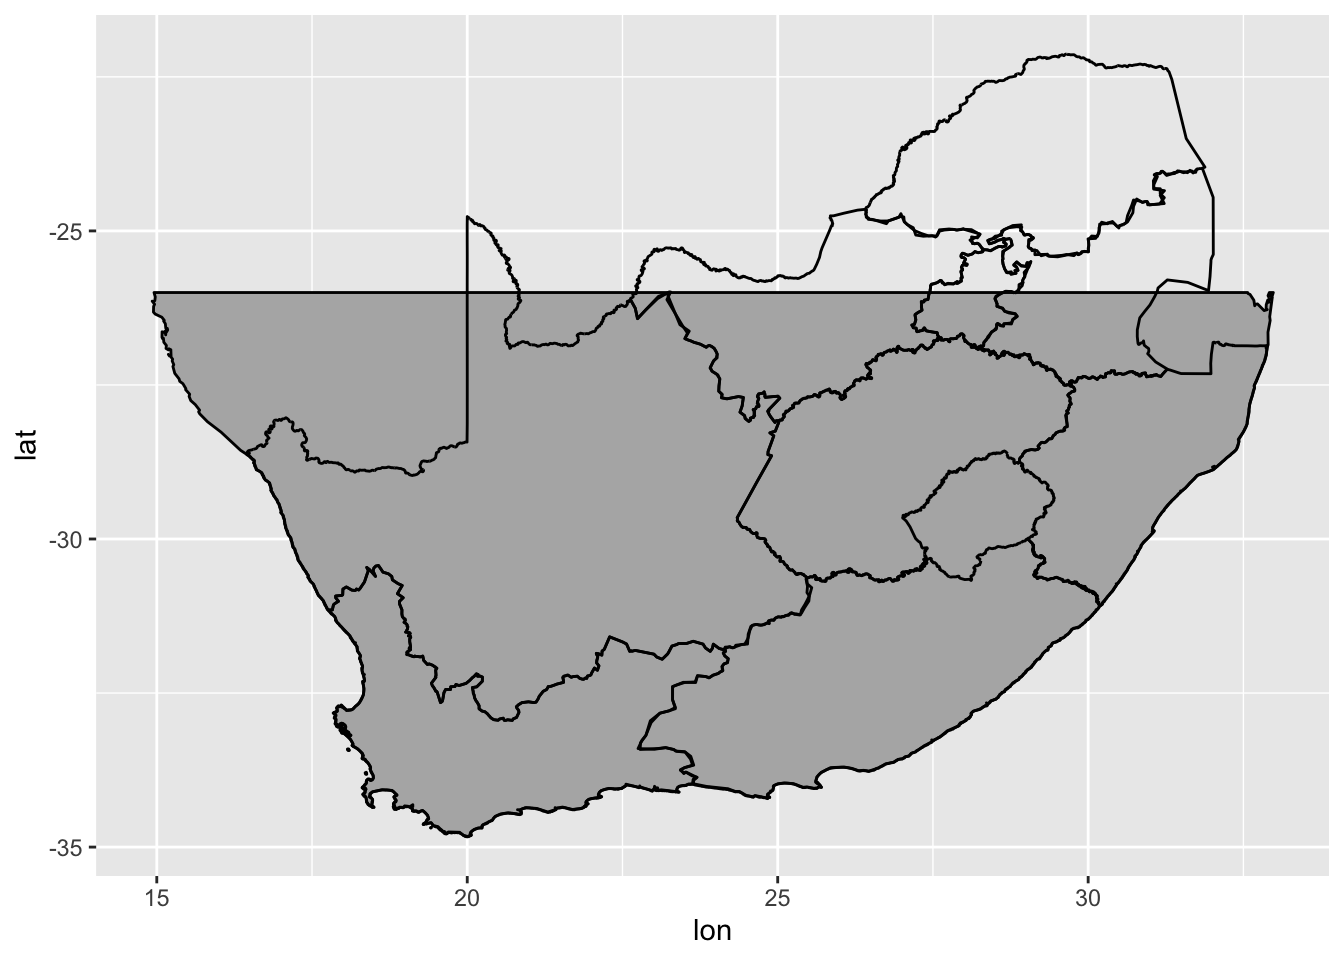 The map of South Africa. Now with province borders!